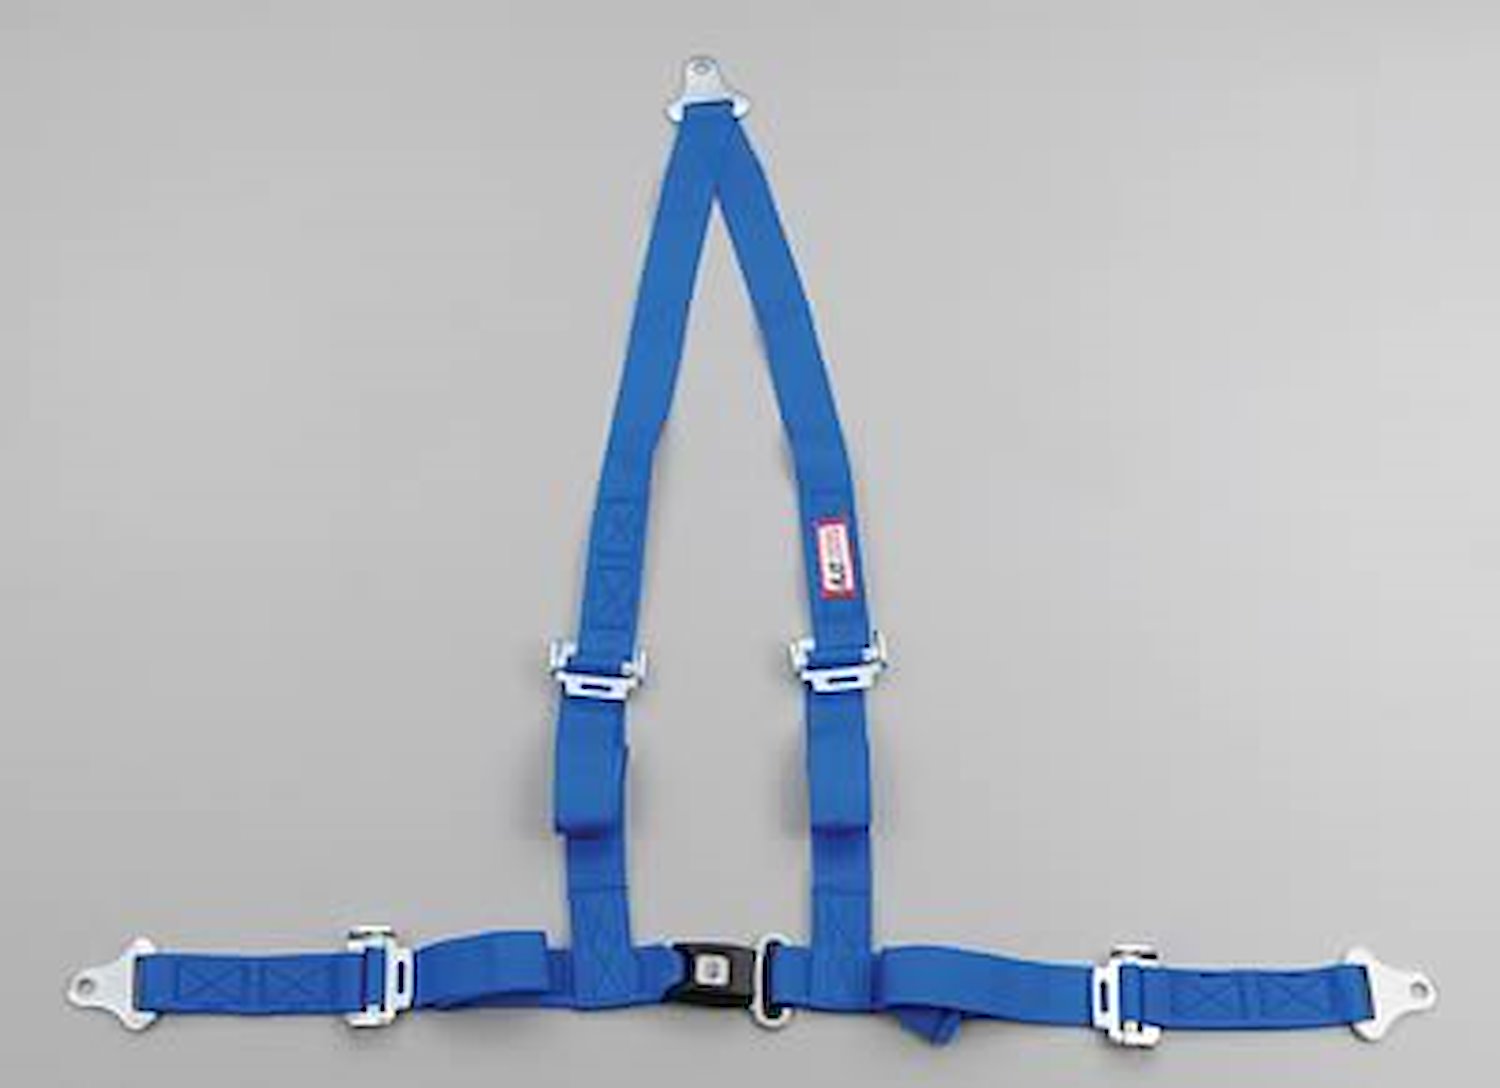 NON-SFI B&T HARNESS 2 PULL UP Lap Belt 2 S. H. V ROLL BAR Mount ALL BOLT ENDS w/STERNUM STRAP BLUE